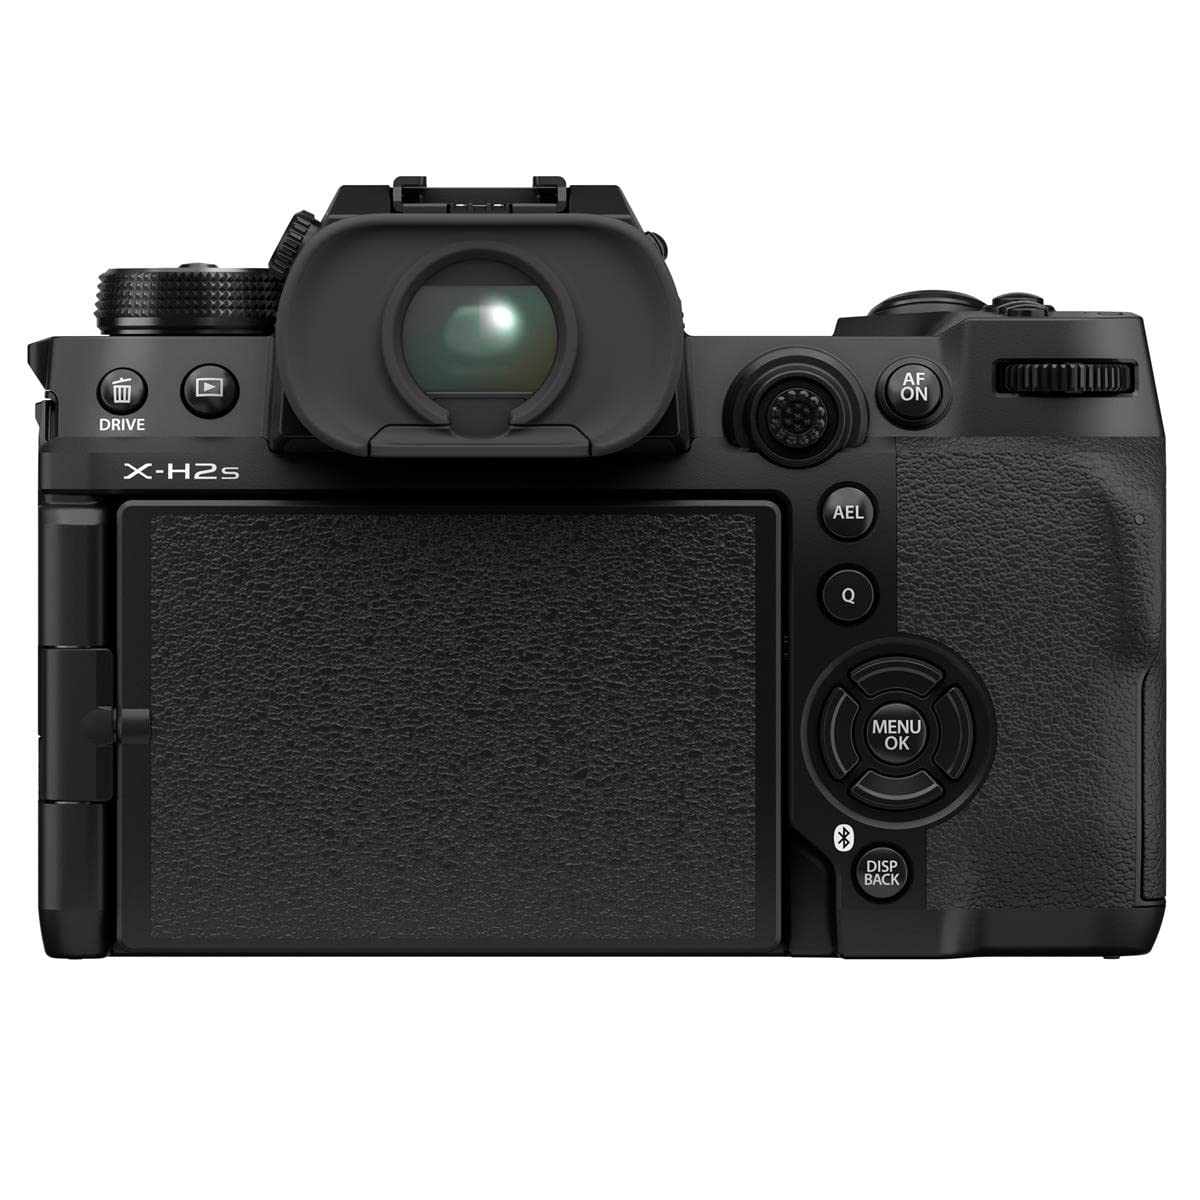 Fujifilm X-H2S Mirrorless Digital Camera Body with XF 16-55mm F2.8 R LM WR (Weather Resistant) Lens